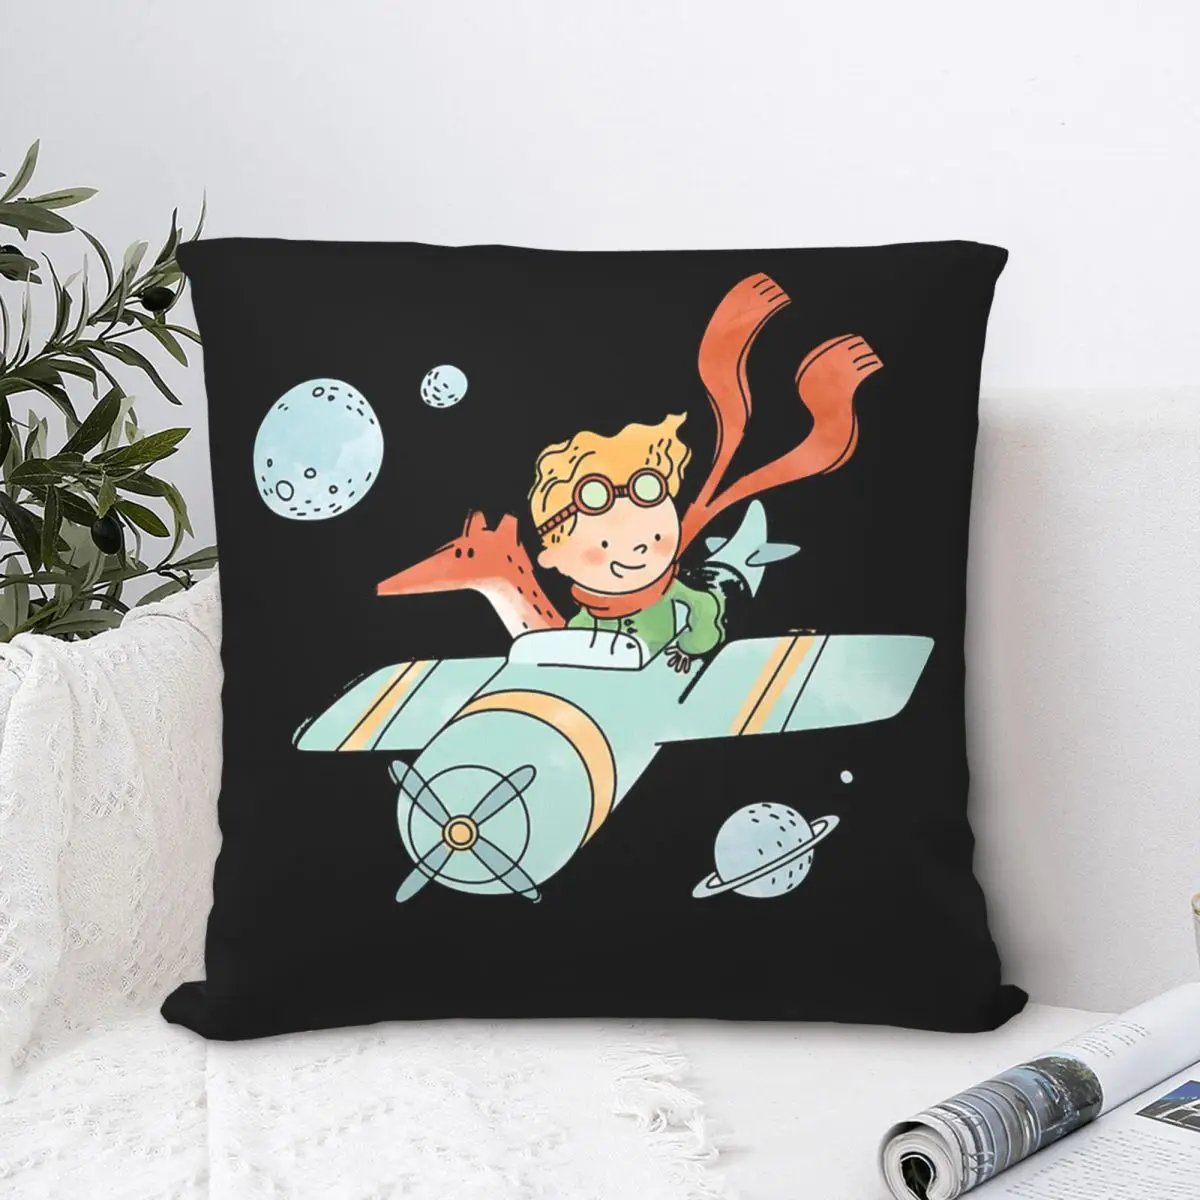 

Take Plane Hug Pillowcase The Little Prince Backpack Cojines Bedroom DIY Printed Car Throw Pillow Case Decorative